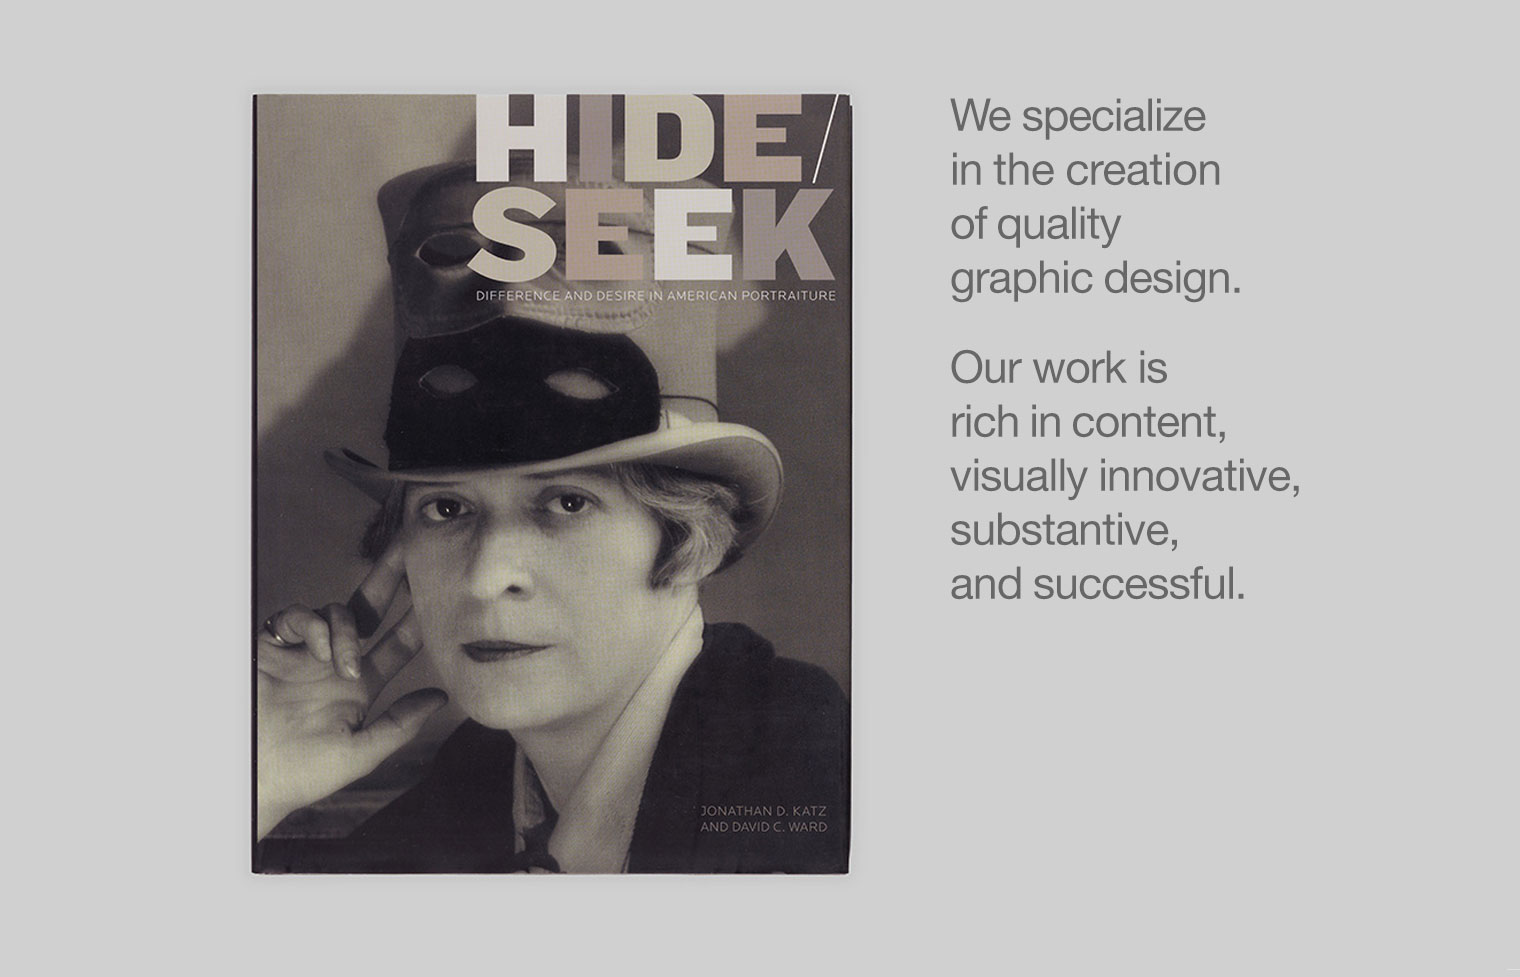 Cover from the Hide/Seek exhibition catalogue for the National Portrait Gallery